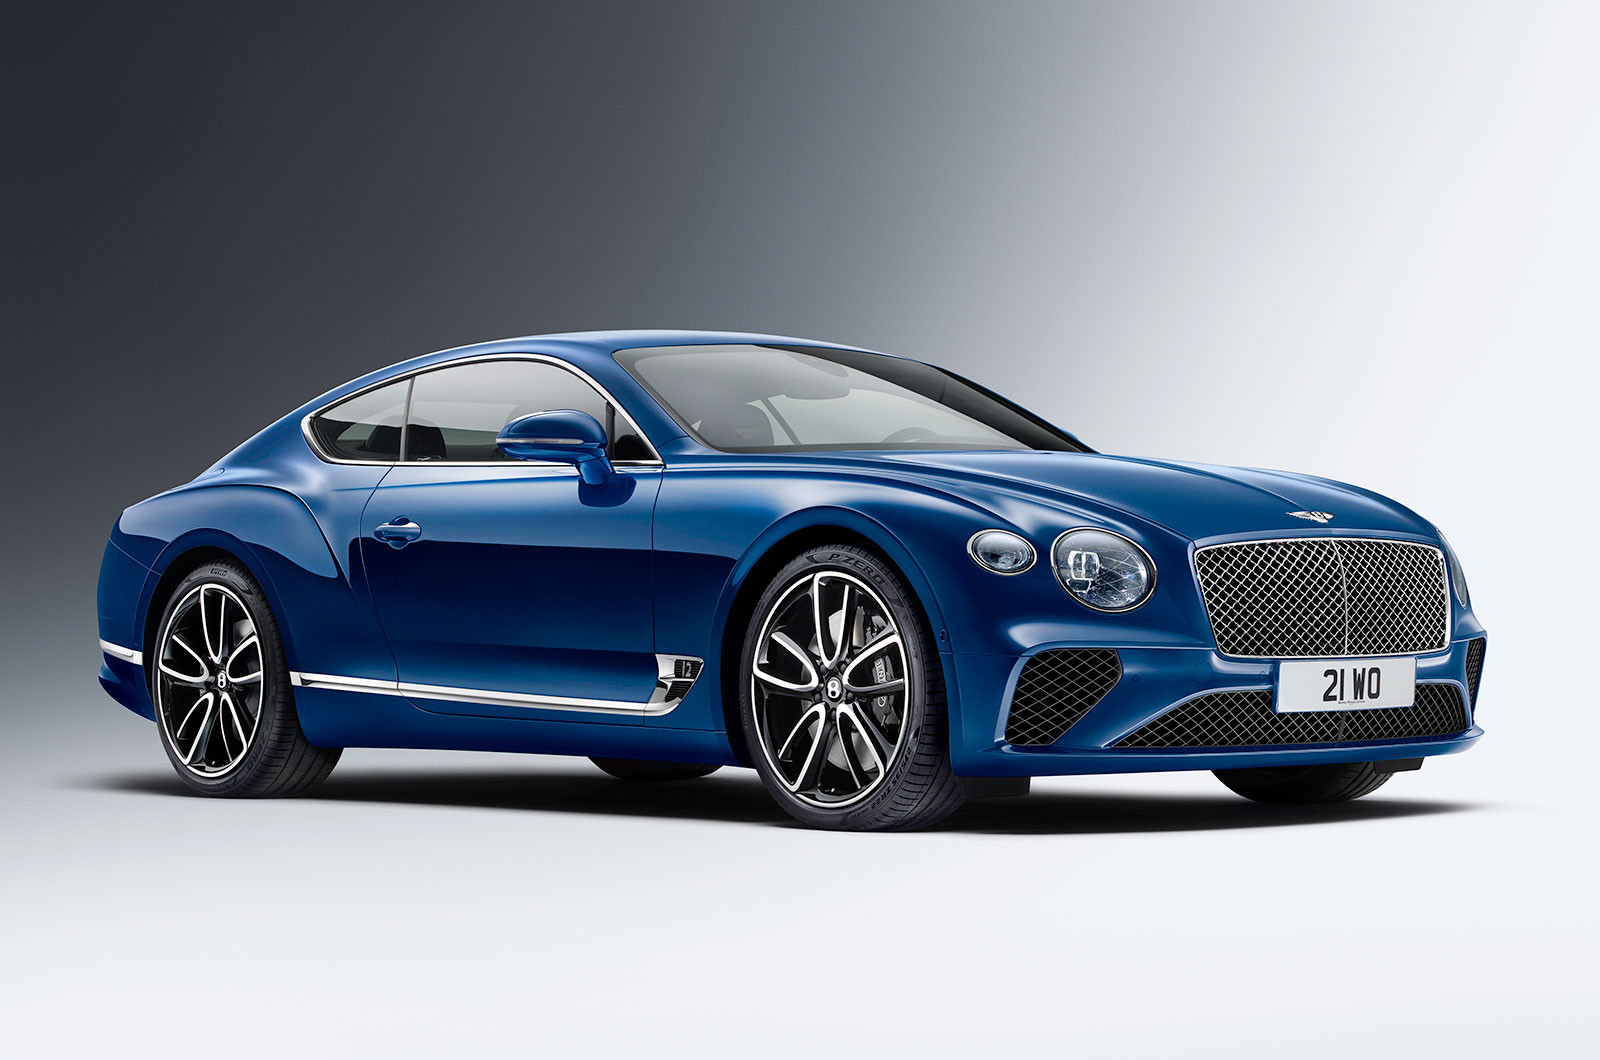 <p>Having hit on a successful formula, Bentley introduced a third take on the <strong>Continental GT </strong>14 years after the original had hit the road. There was still the familiar 6.0-liter W12 engine, now with <strong>635 HP</strong> and 664-lb ft of torque, with that power being transmitted to all four wheels via an eight-speed dual-clutch automatic transmission.</p>